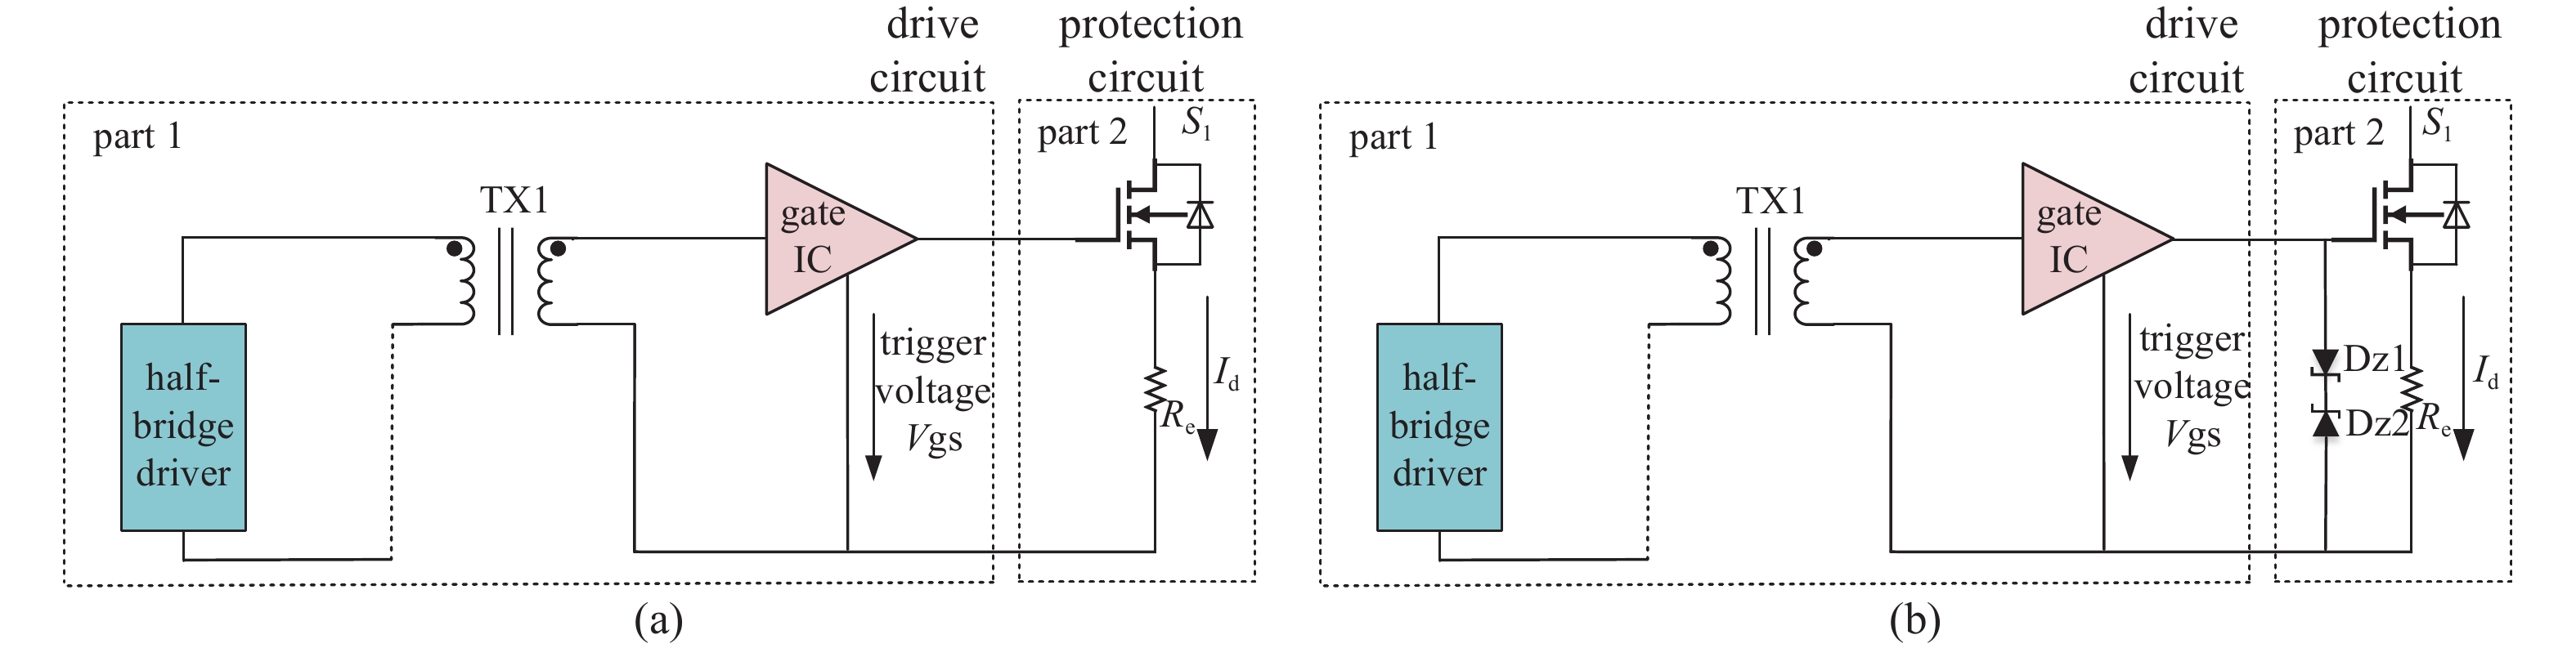 Schematic diagram of drive system with over-current protection